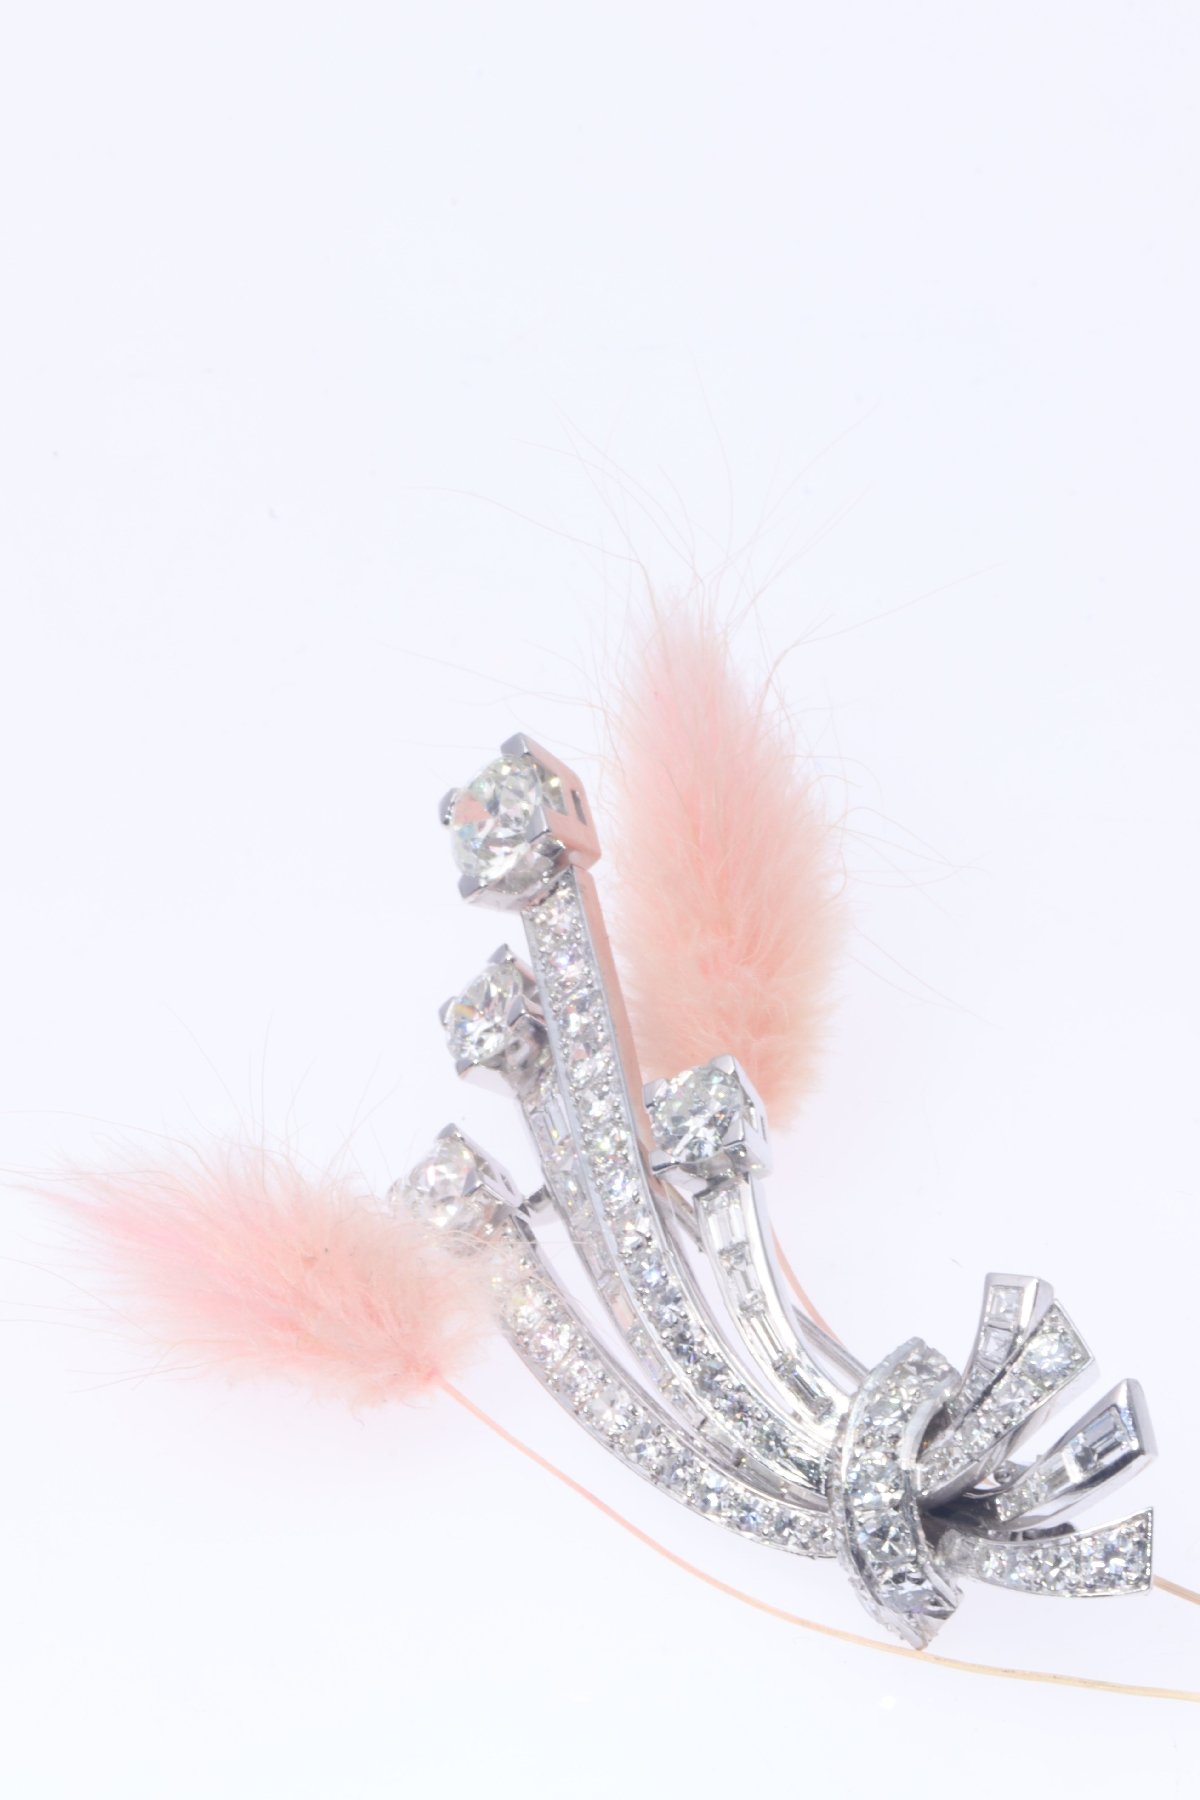 Click the picture to see more of this Elegant Diamond Platinum Vintage/Estate Brooch (ca. 1950)